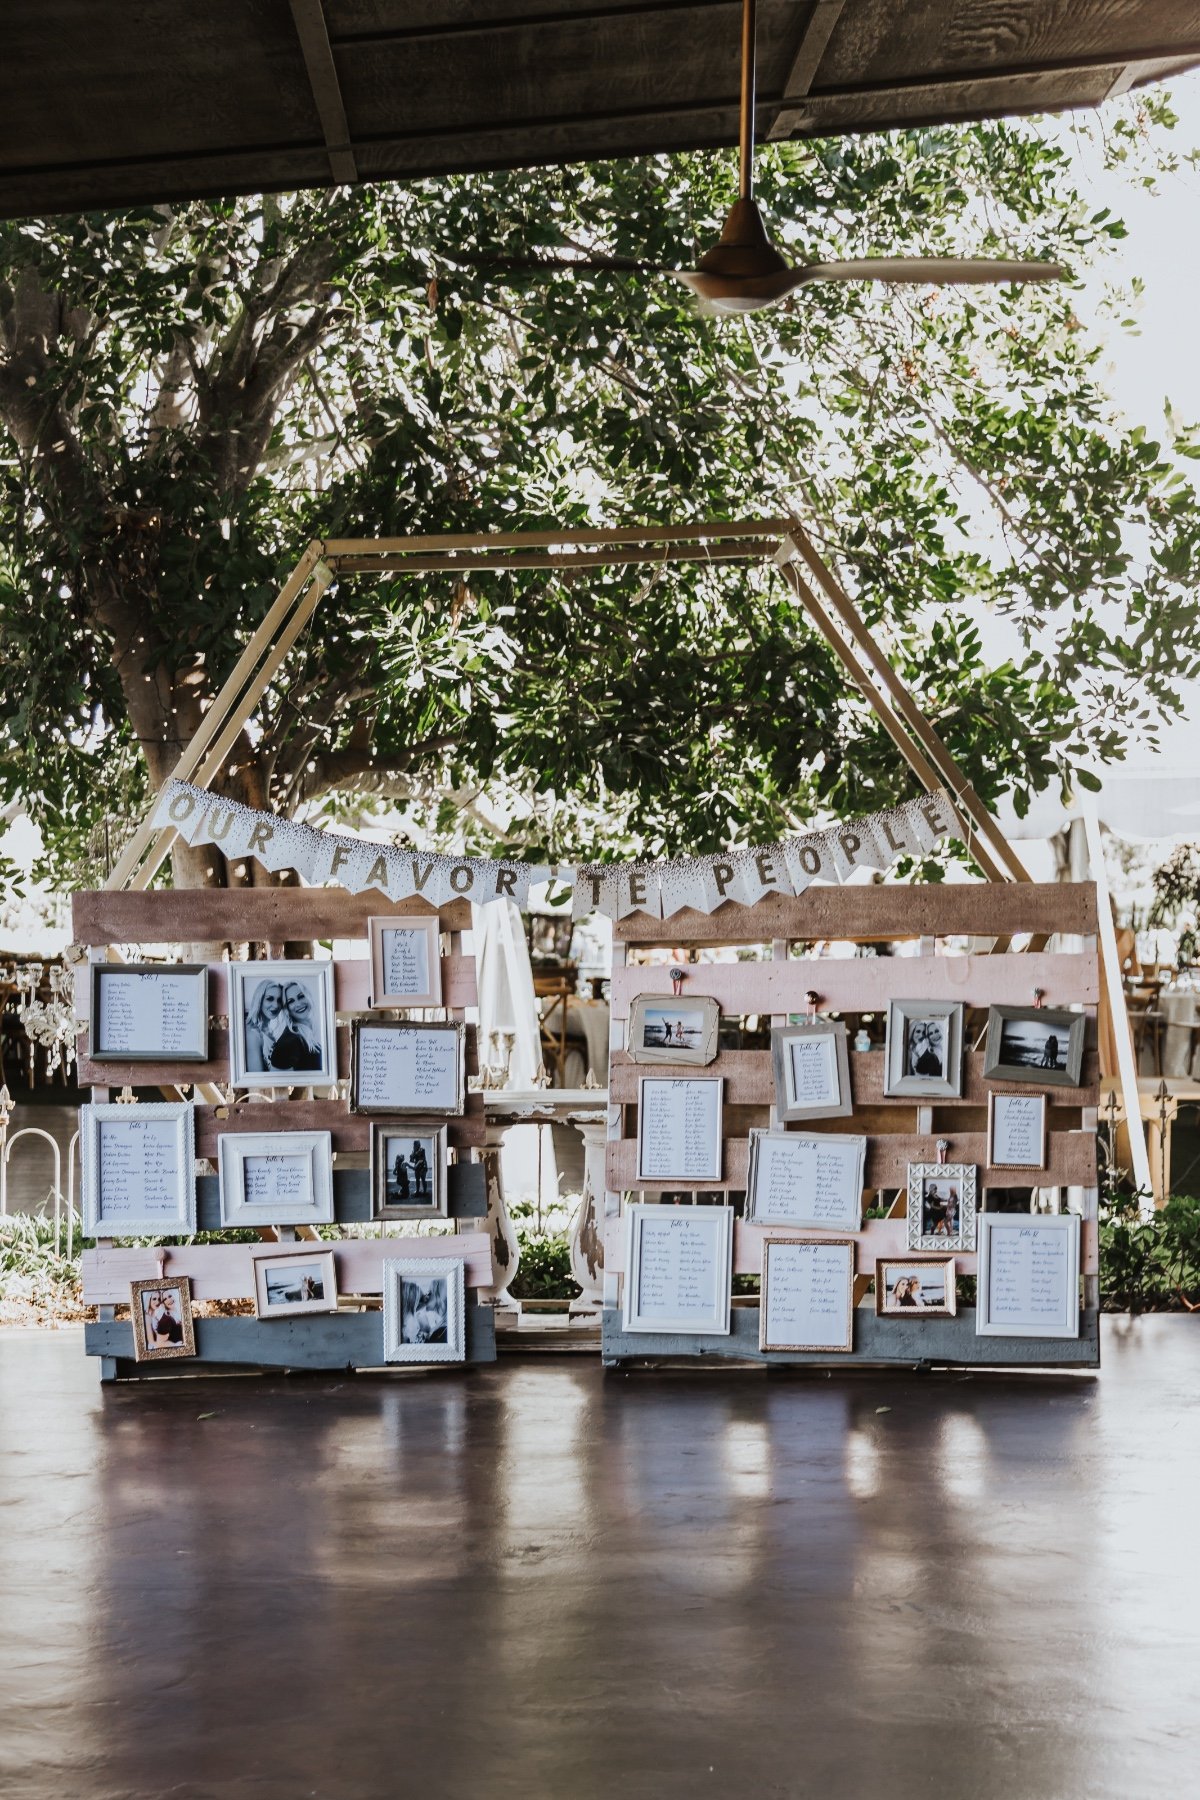 Our favorite people memory wall at wedding